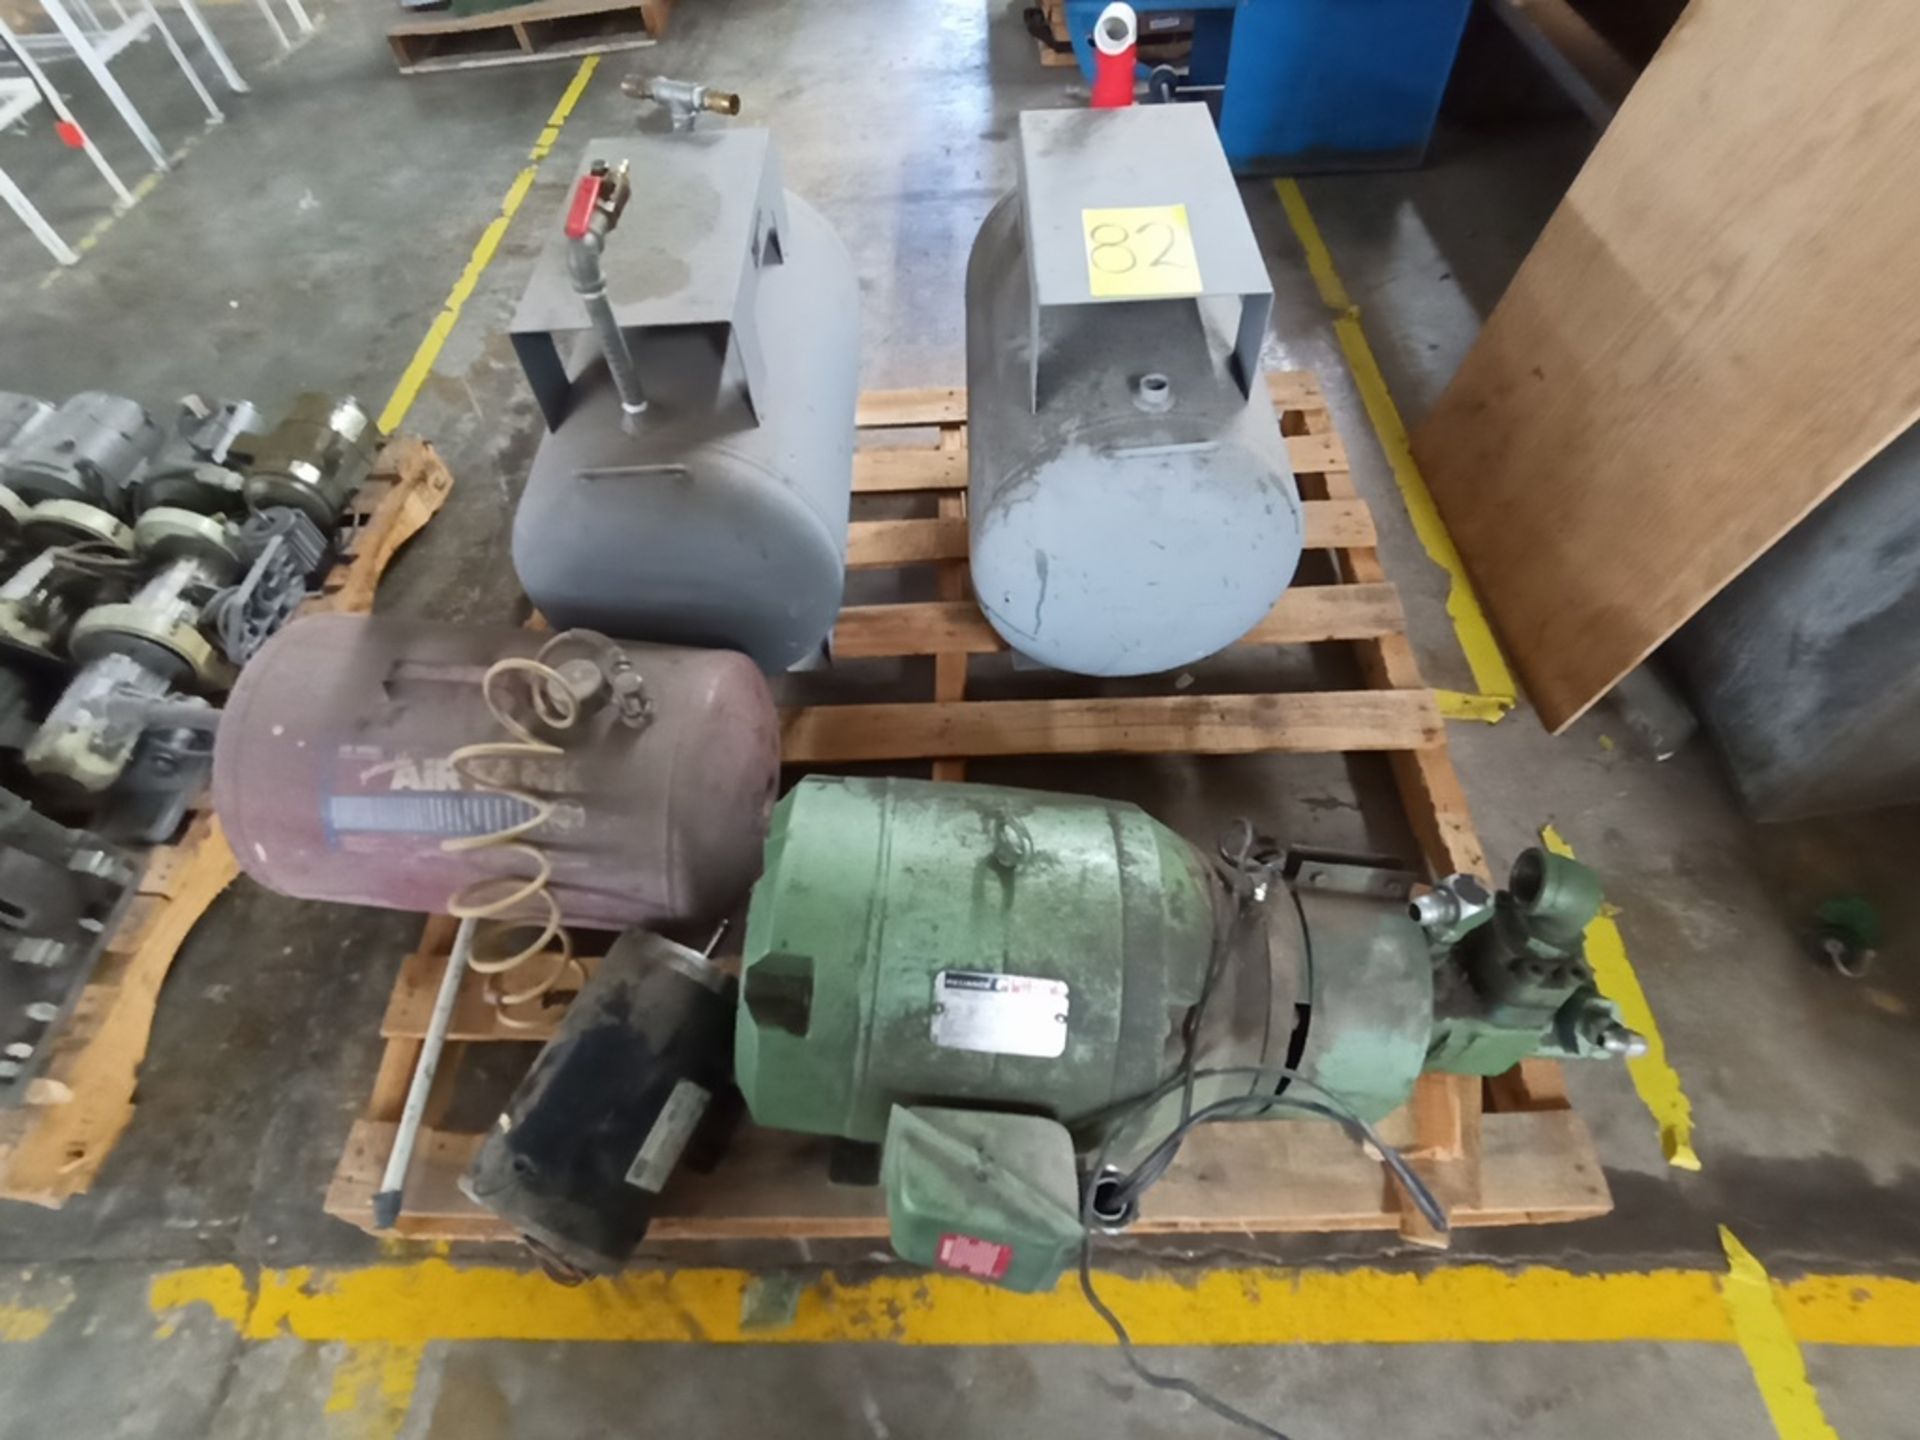 Pallet with 2 TEI tanks of 50 liter , model 29GAL, Series 251020 -161020, 1 Reliance Pump